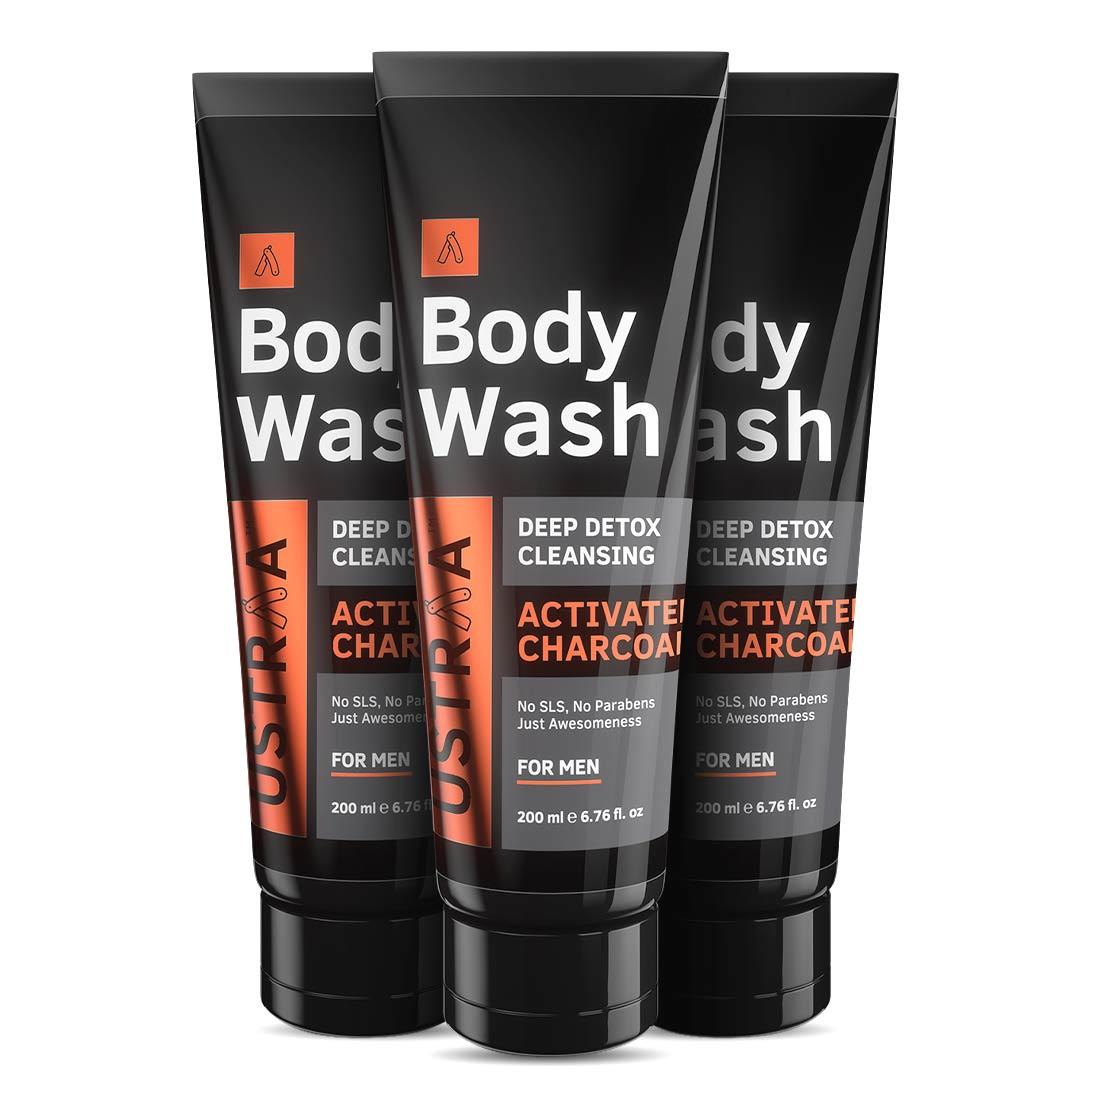 Body Wash for Men - Activated Charcoal - 200 ml - Set of 3